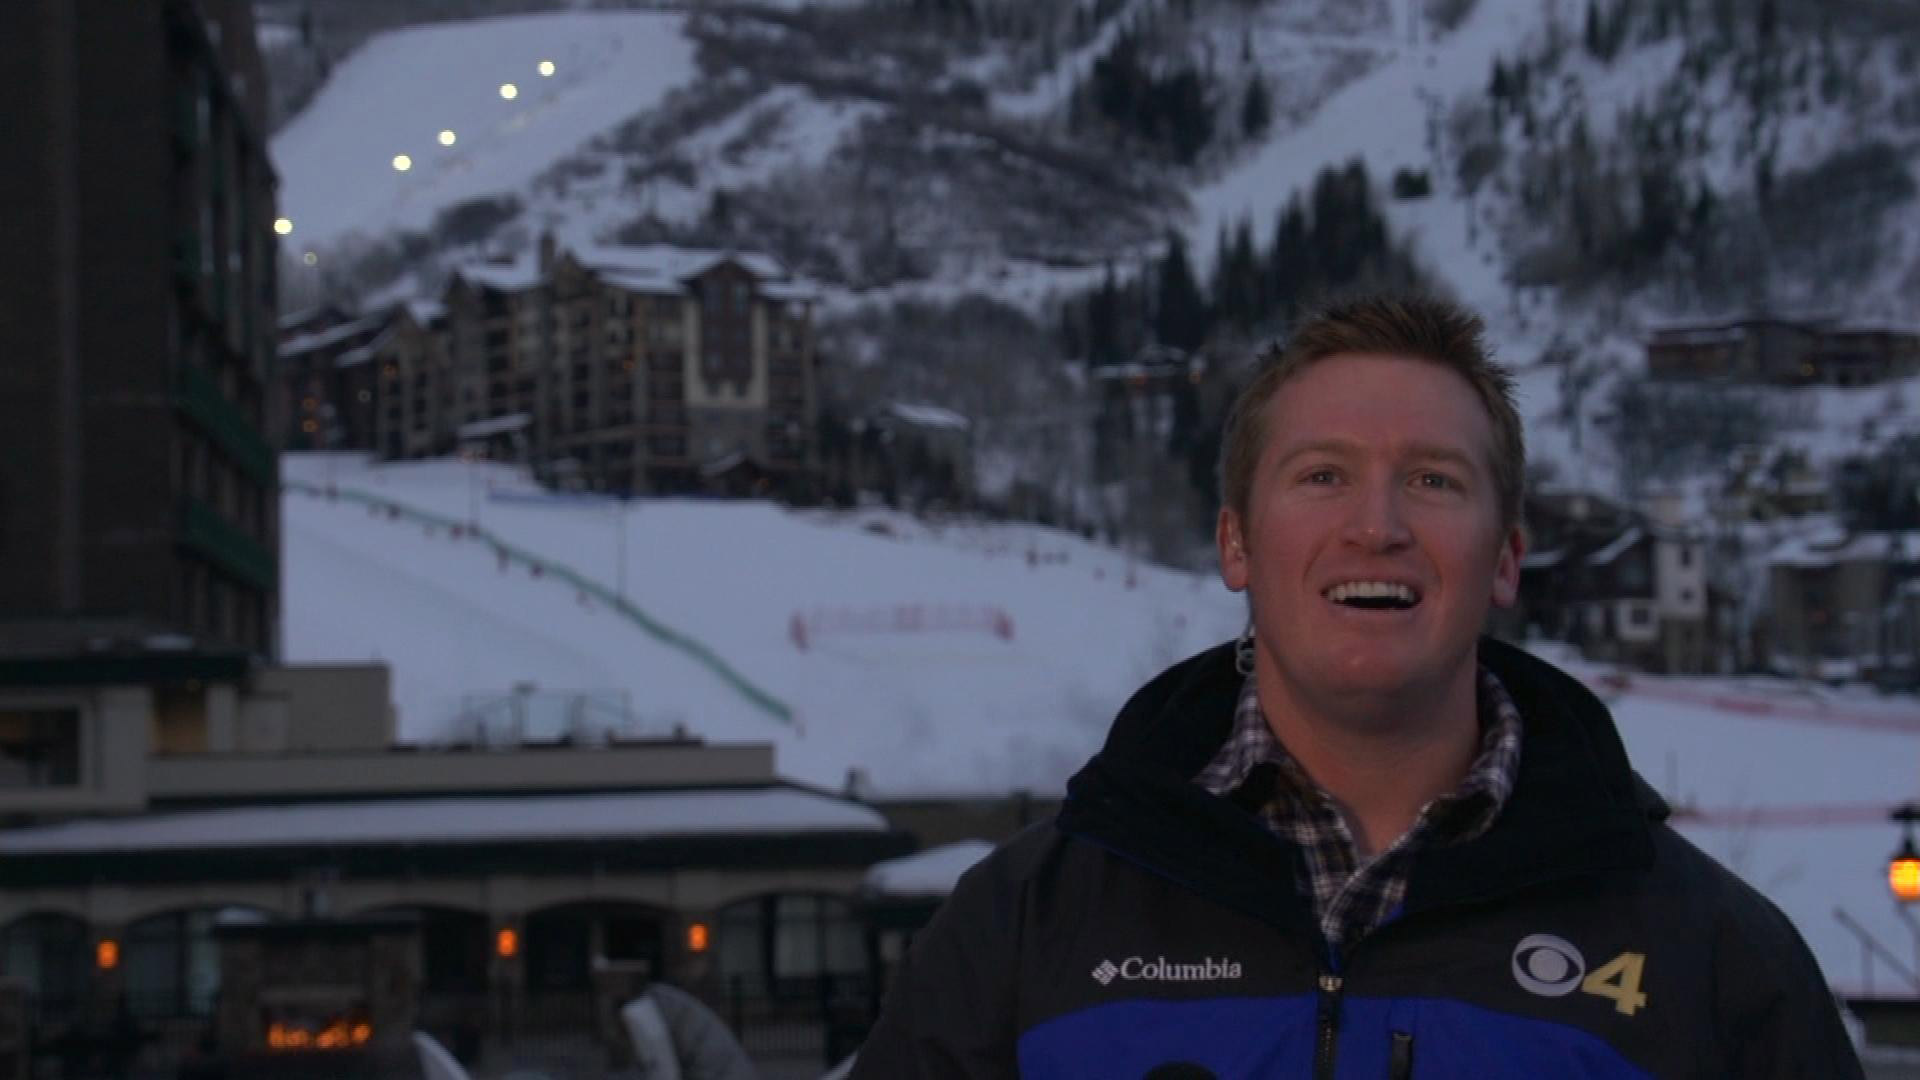 CBS4's Justin McHeffey reported live from Steamboat on Jan. 19, 2015. (credit: CBS)